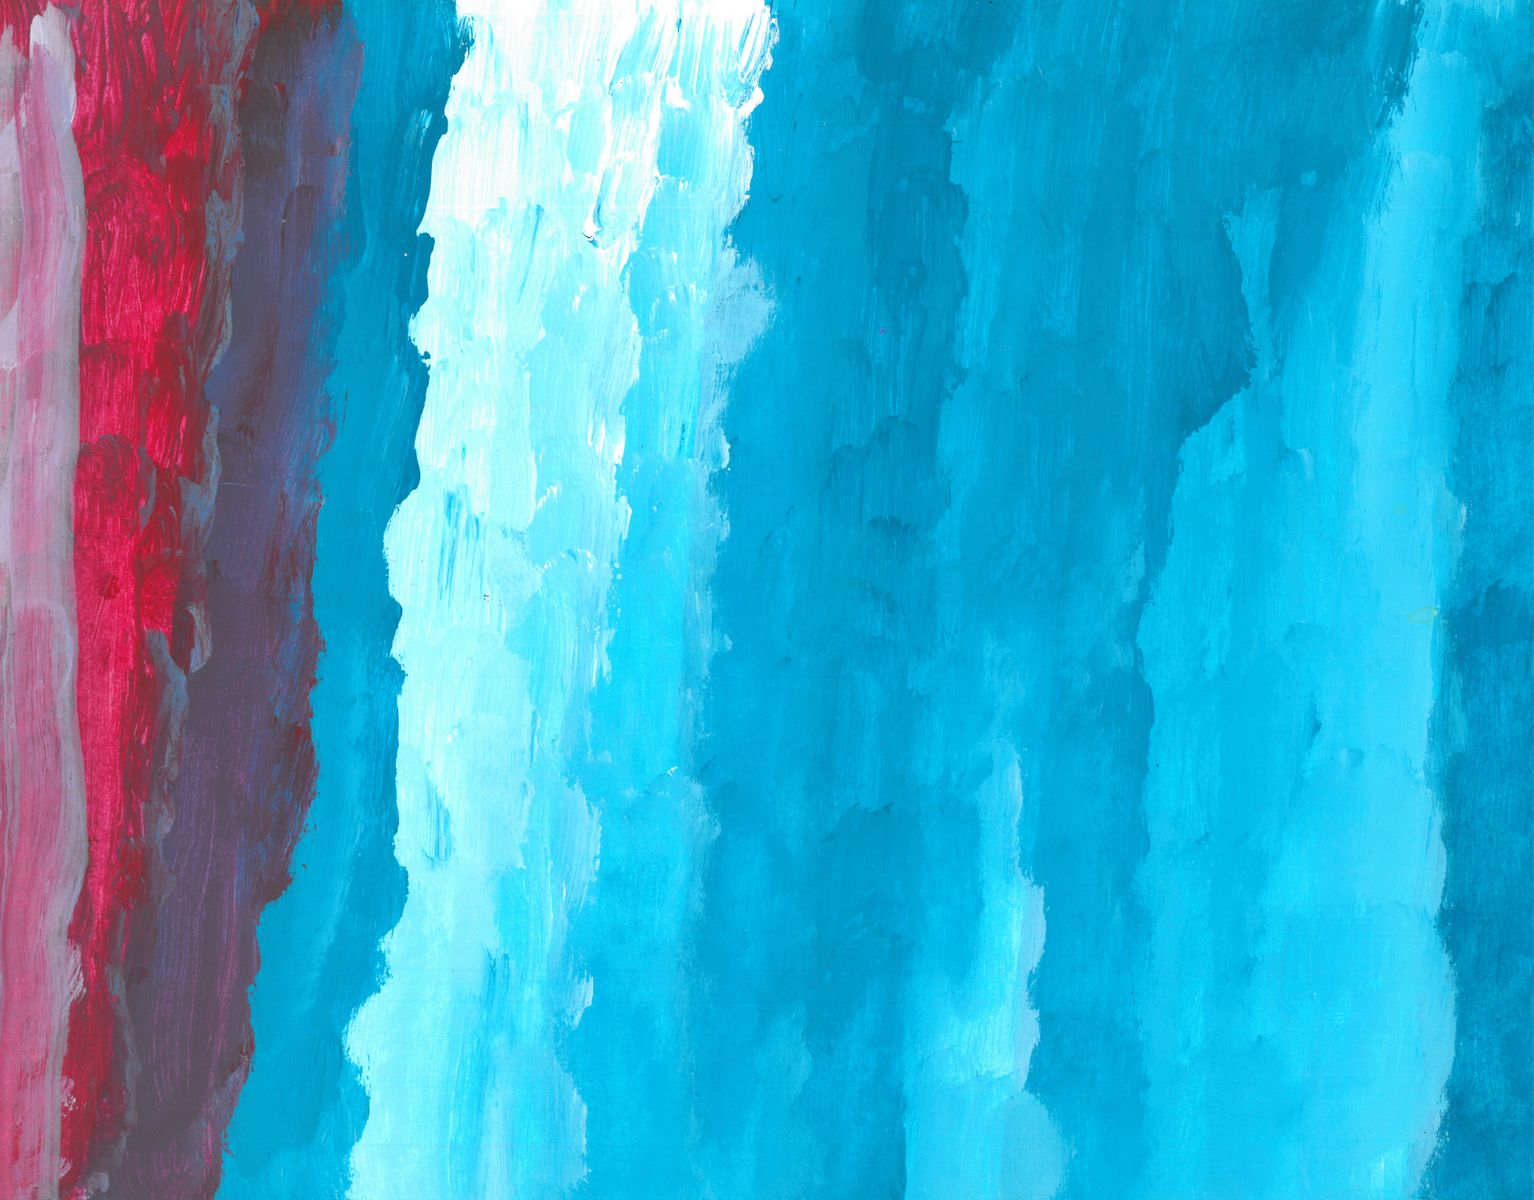 Acrylic on paper artwork with pink, red, purple, dark blue, and light blue vertical gradient from left to right